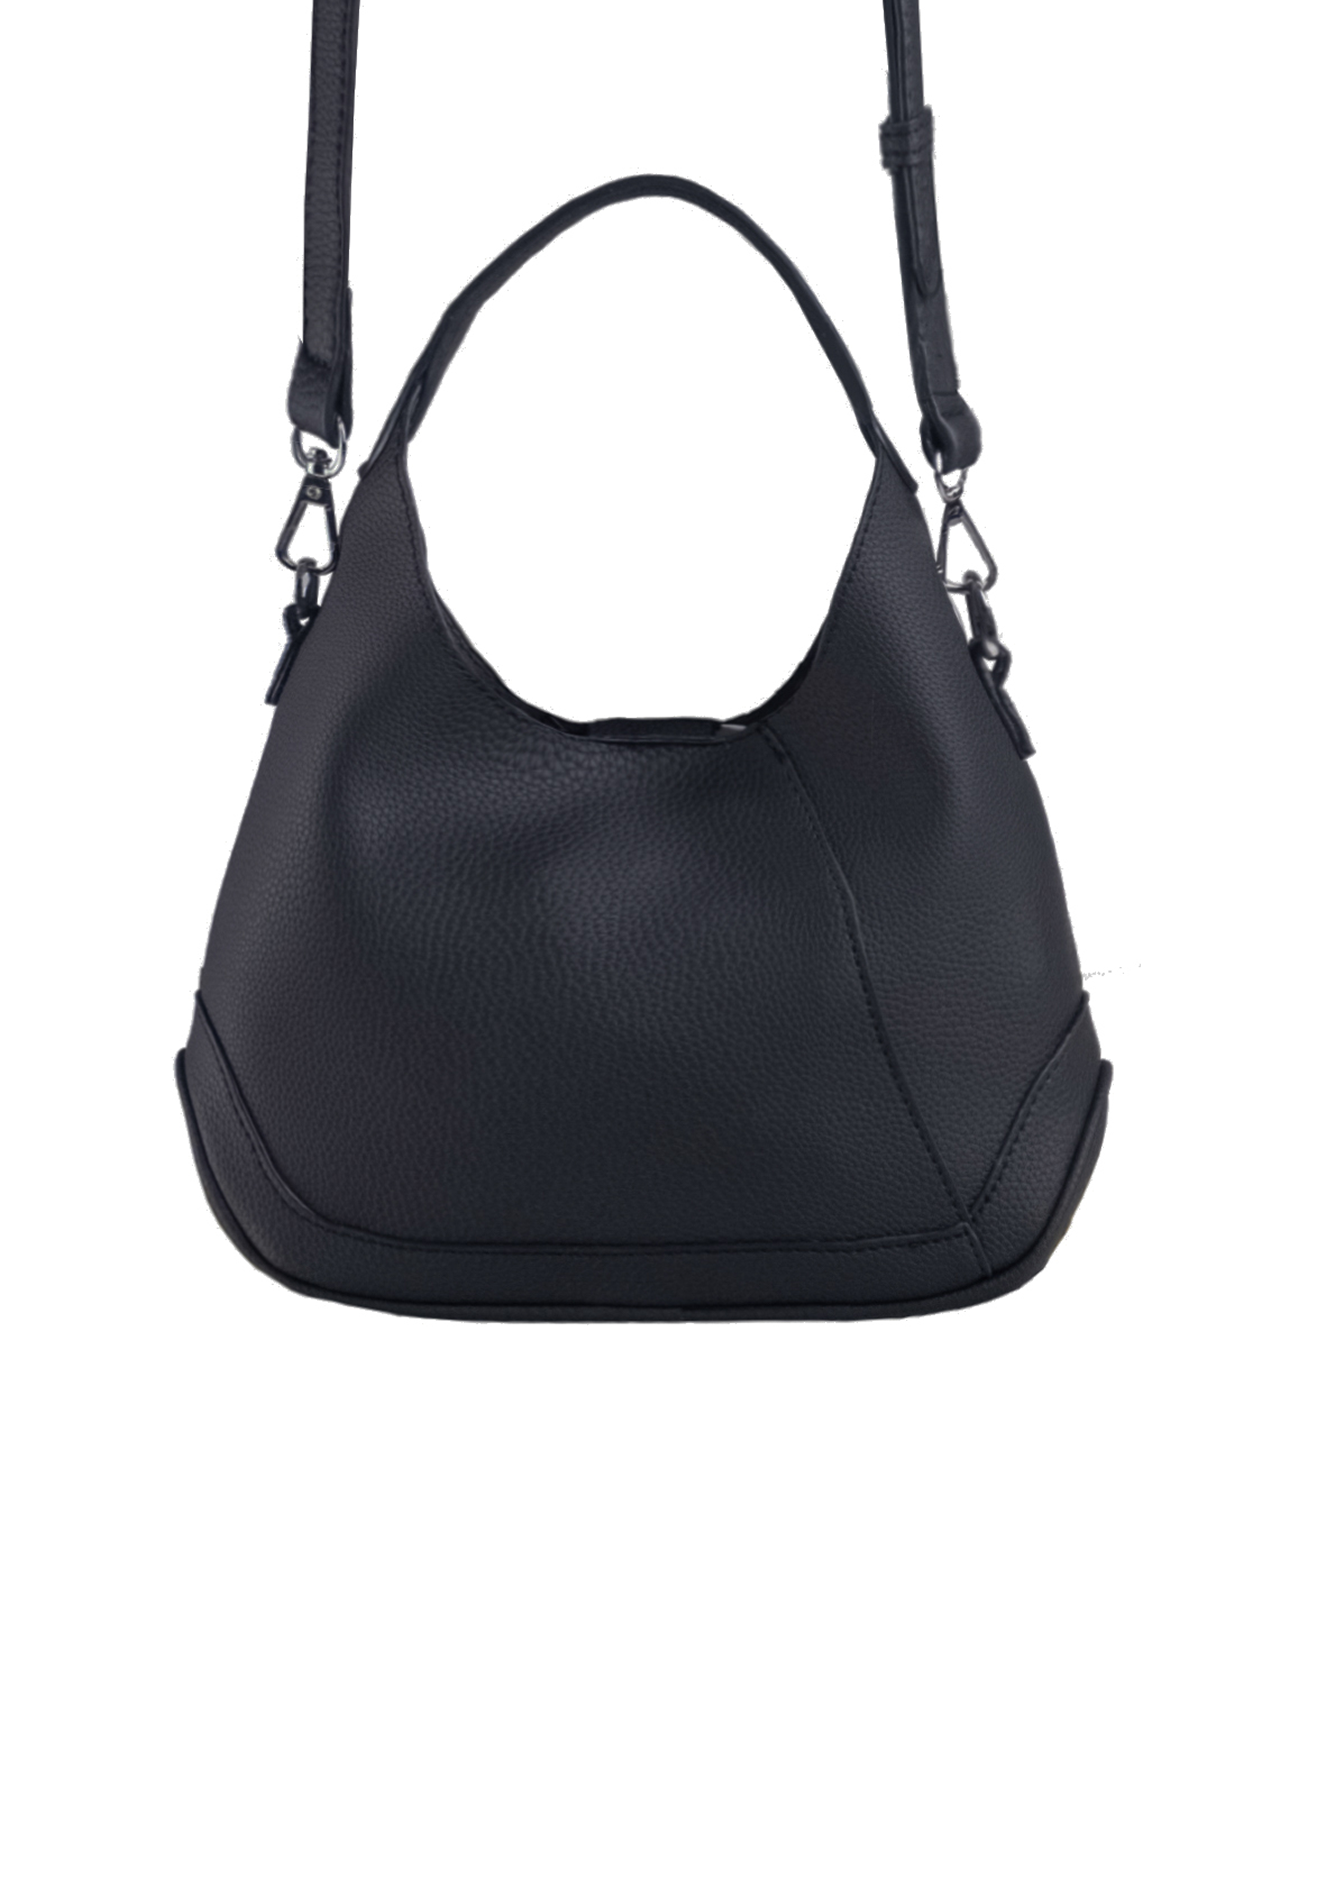 VOIR QUINN Top Handle Small Casual 2-in-1 Hobo Bag